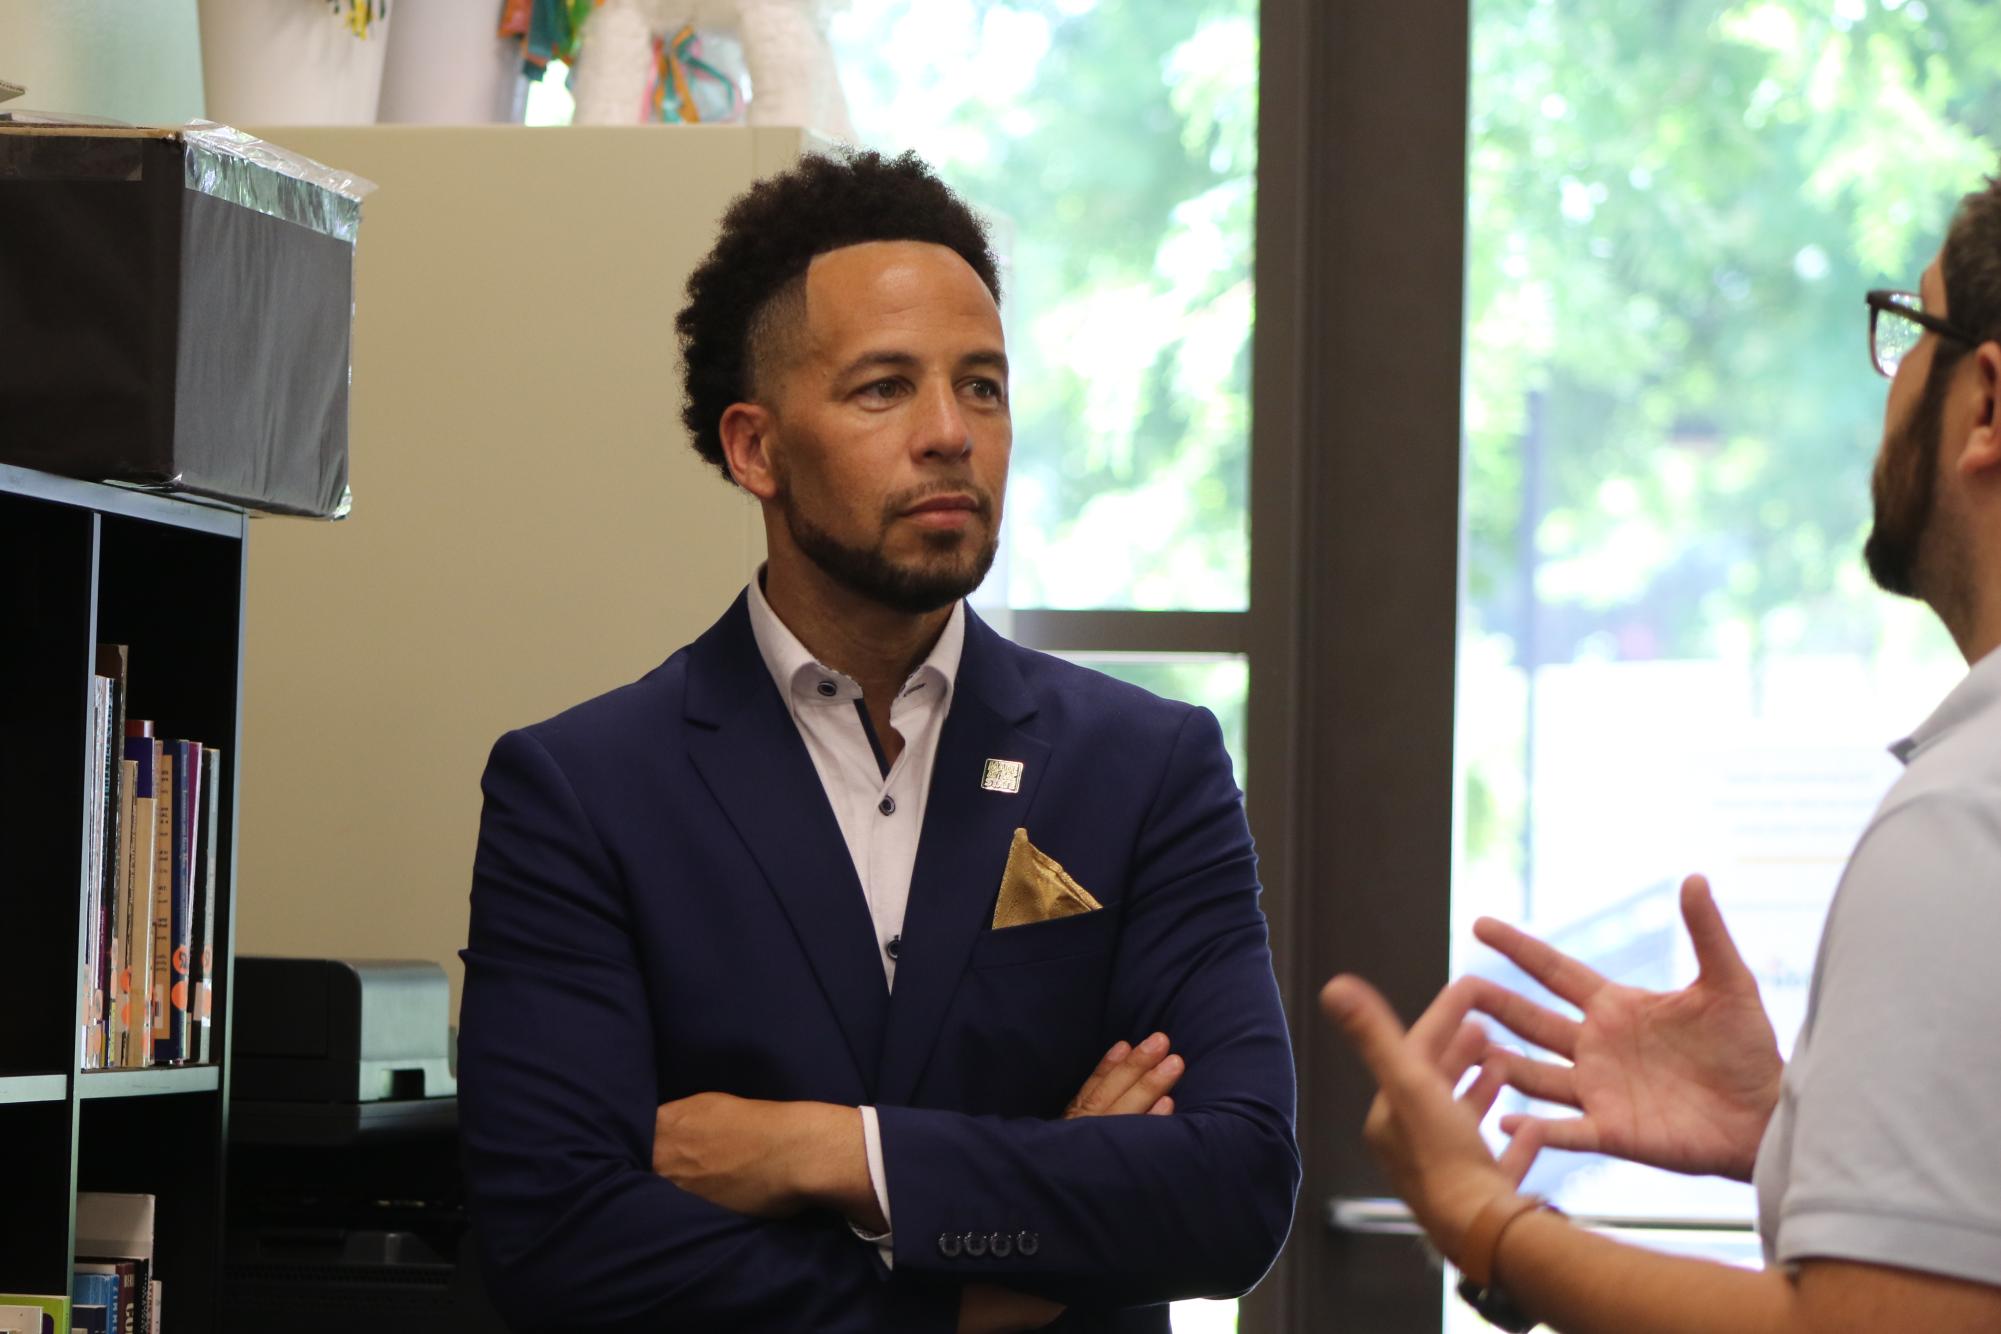 President Luke Wood (left) meeting with members of Sacramento State’s Pride Center including Director of Strategic Student Support Programs Erik Ramirez (right), July 20, 2023. A Sac State alumnus, Wood was named the ninth president and second Black president of the university over the summer.